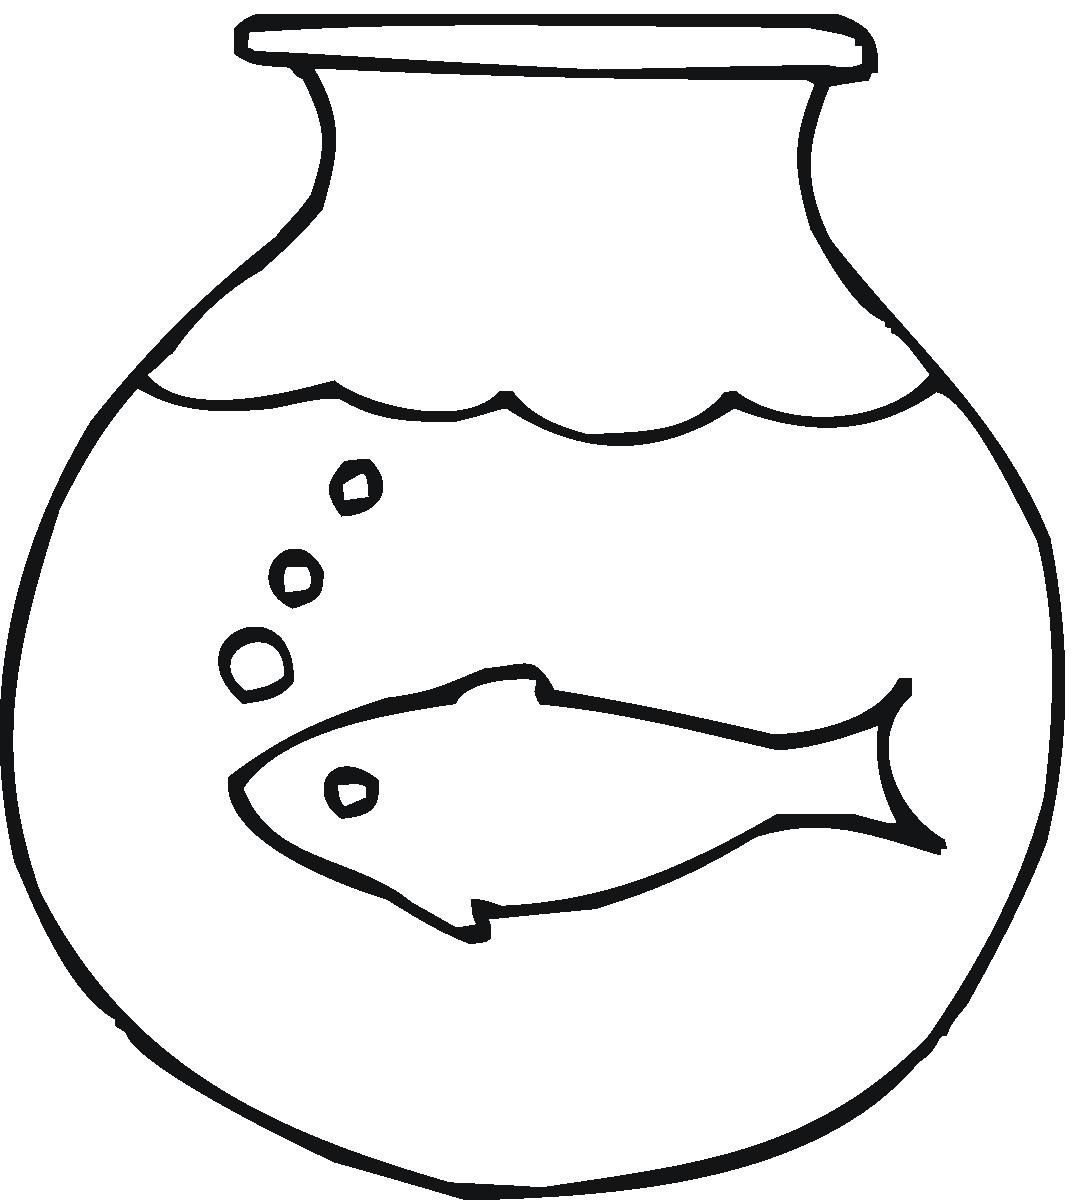 Fish bowl clipart putes dynu